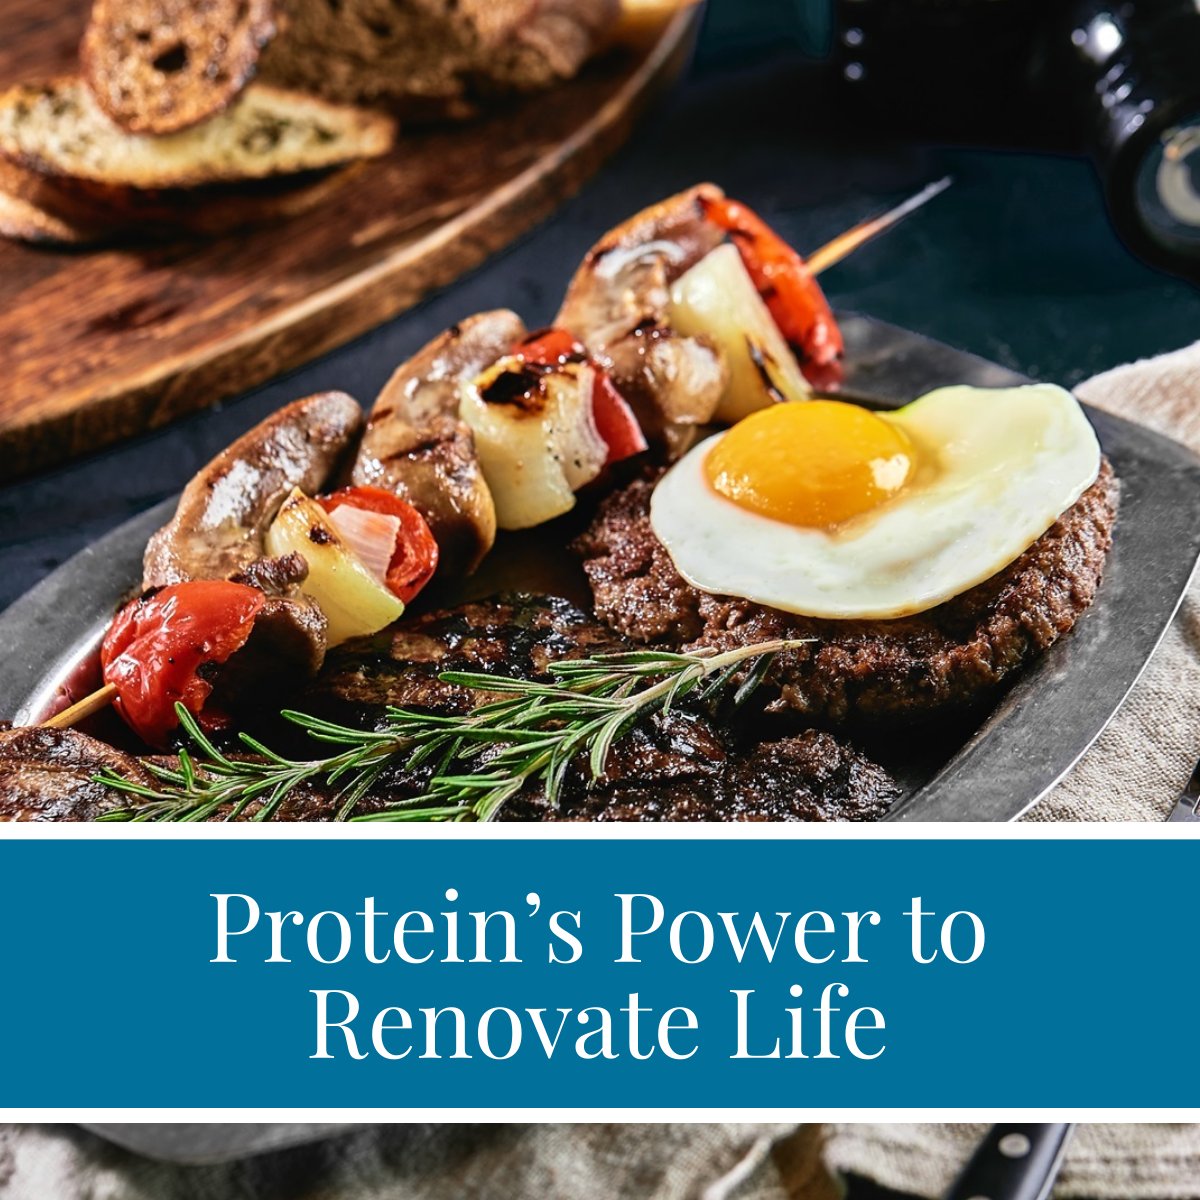 Check out this insightful article on the power of protein in our daily lives! 💪🥩 

Discover the ideal sources and timing for maximum benefits. Don't miss out, read more here: go-symbios.com/proteins-power 🌿🏋️‍♂️

#hiltonhead #hiltonheadisland #hhi